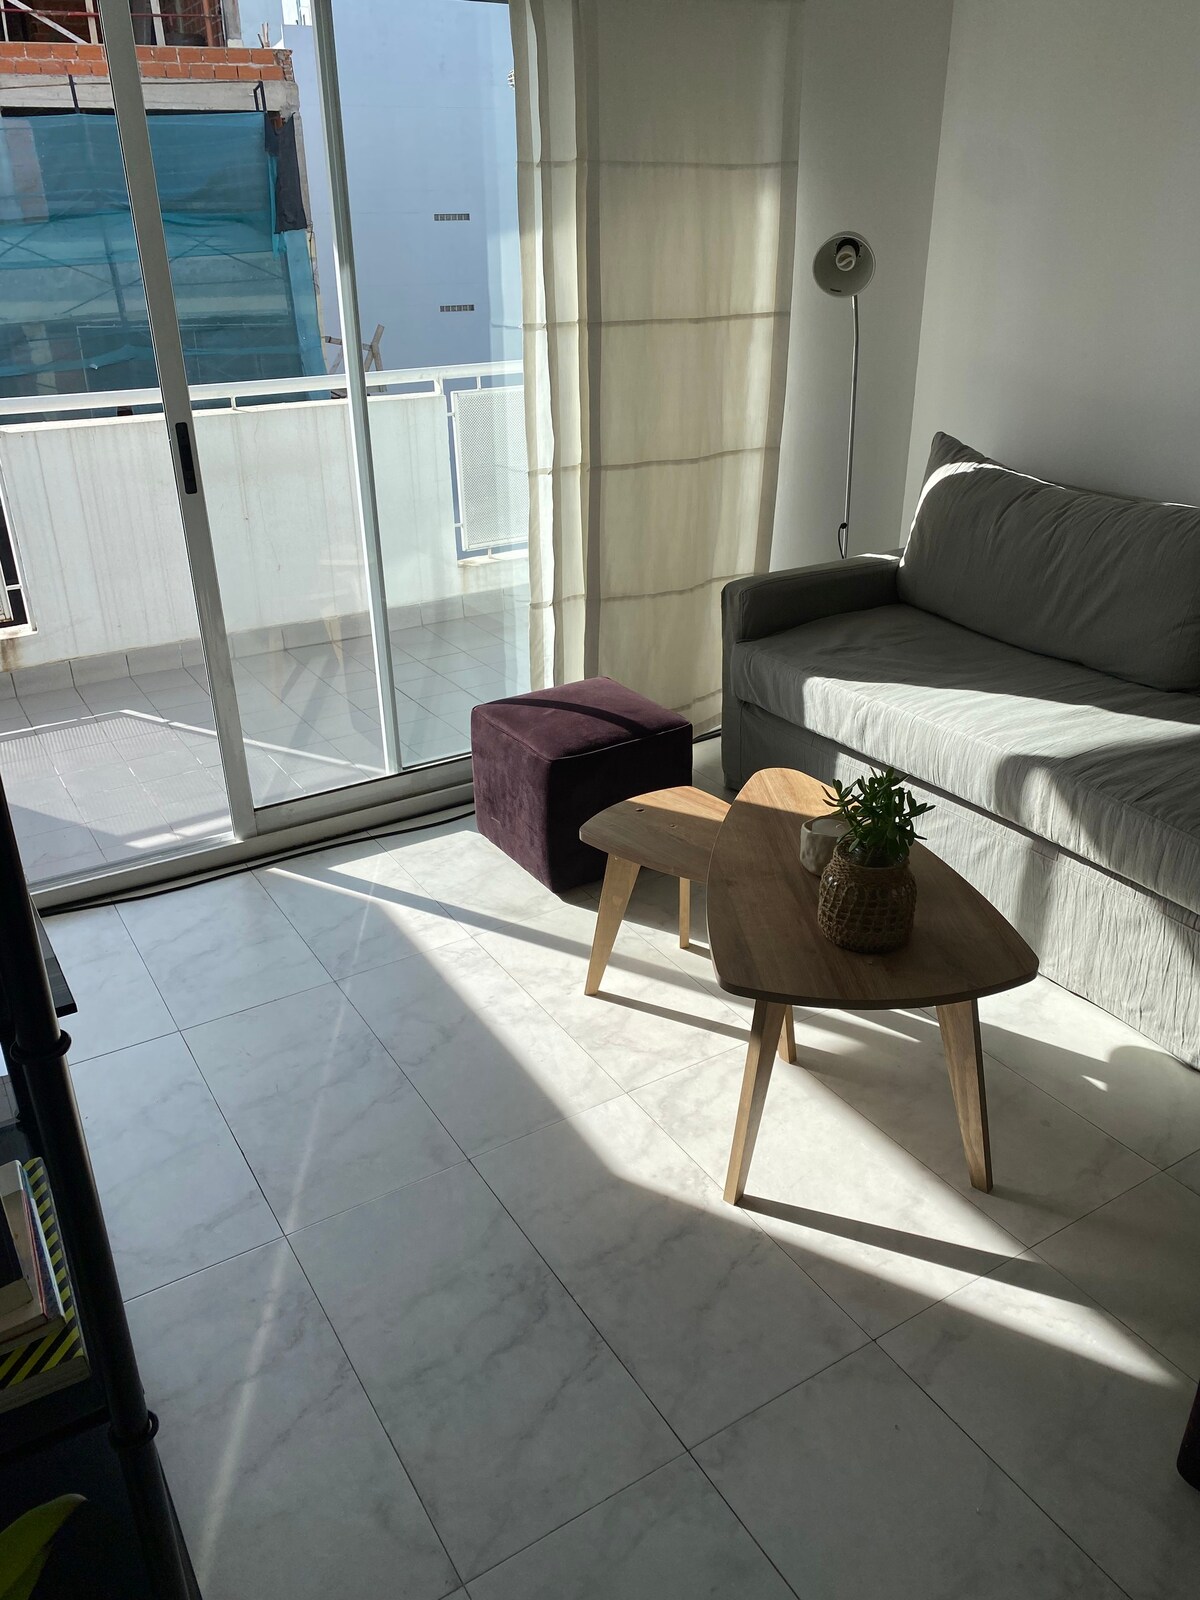 Bright and cosy flat in Palermo. Amazing Terrace.